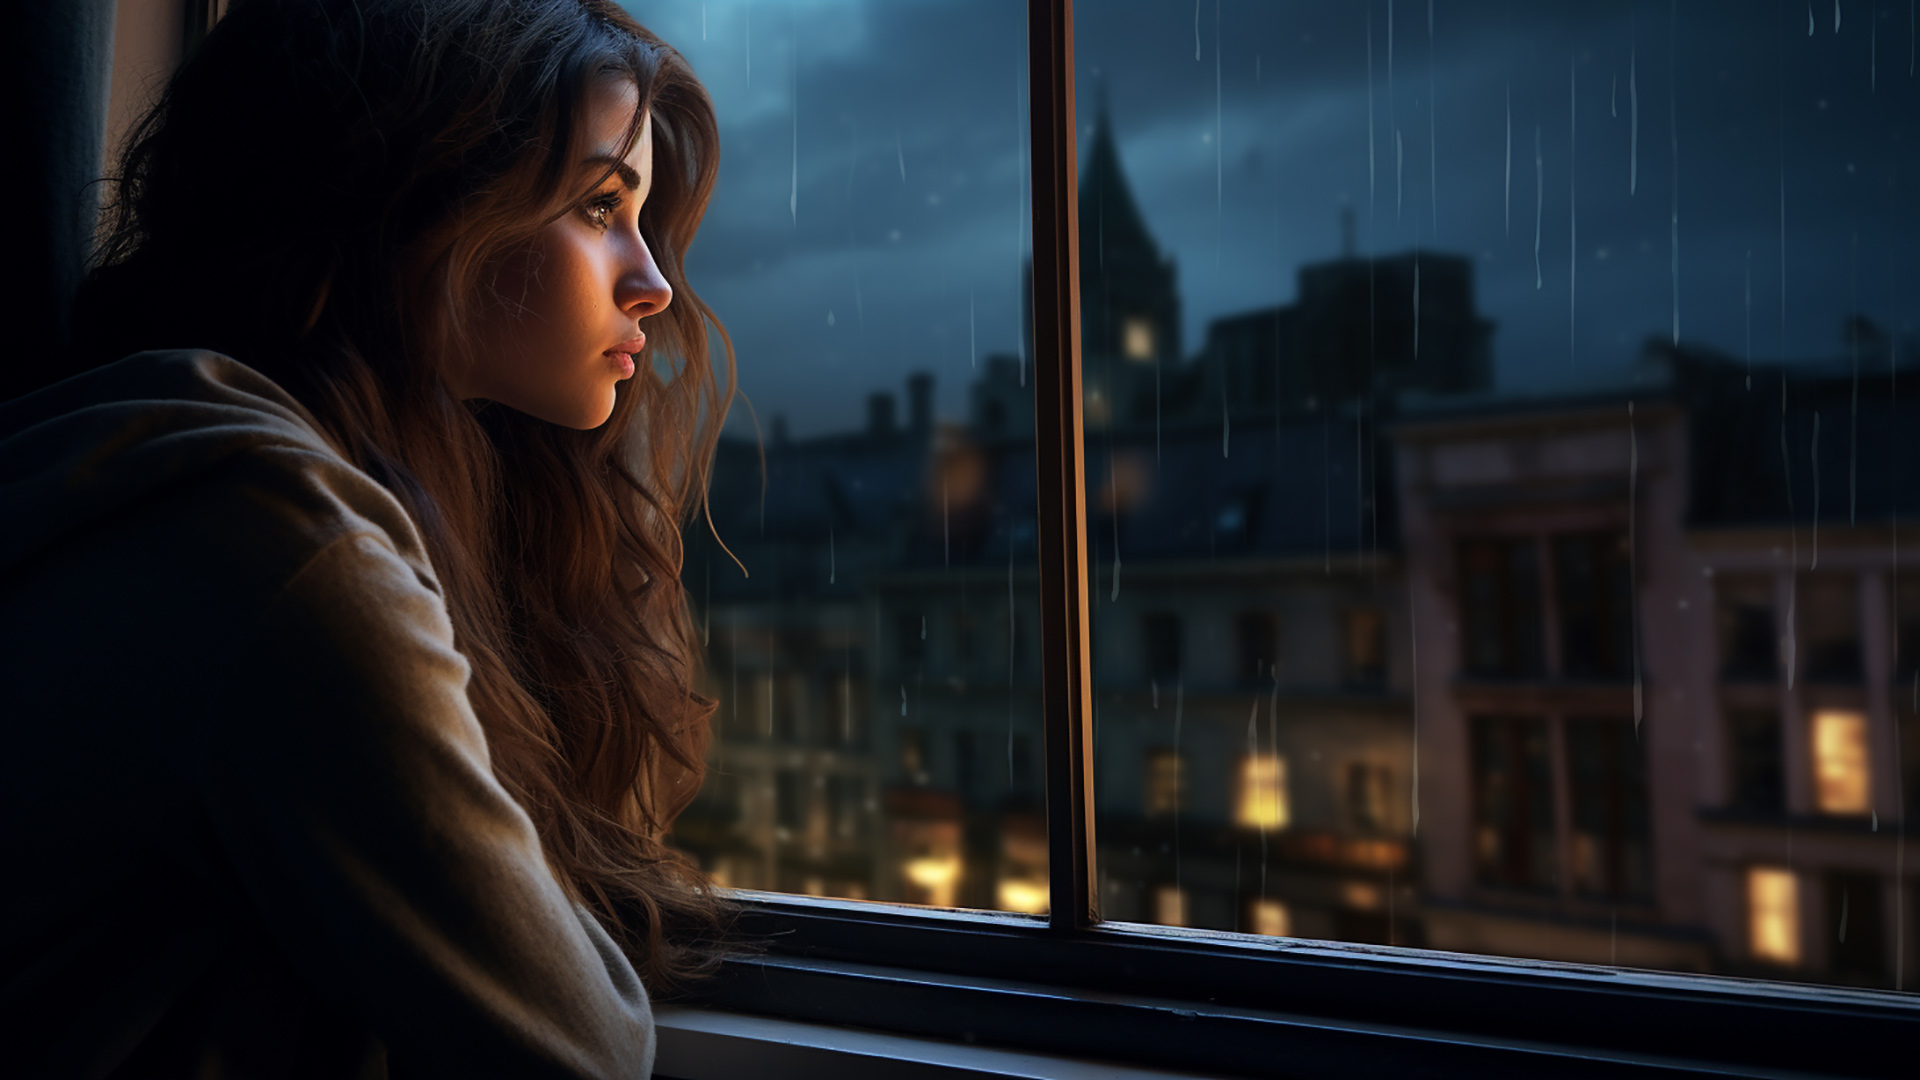 Mood-setting wallpapers: Rainy window and girl for introspection